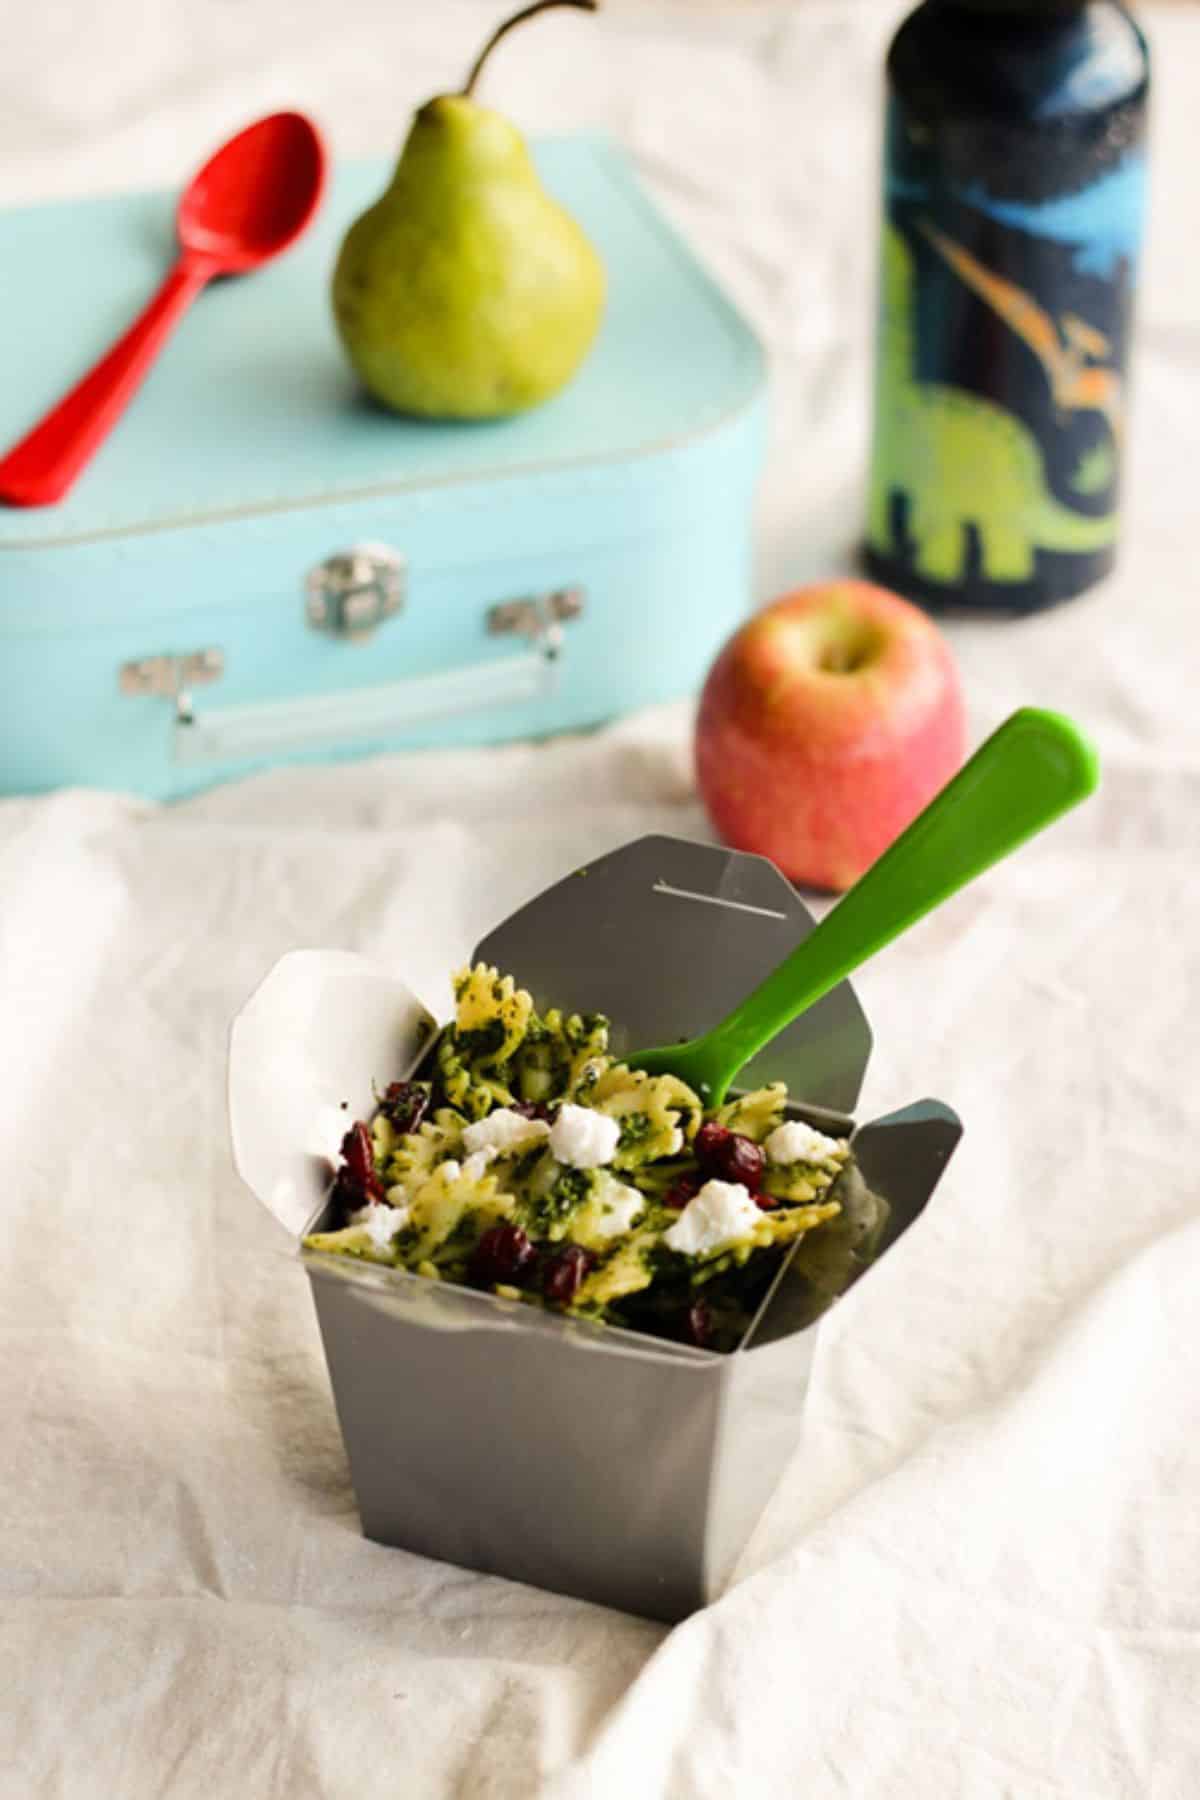 Pasta salad box with a green plastic fork on a table.